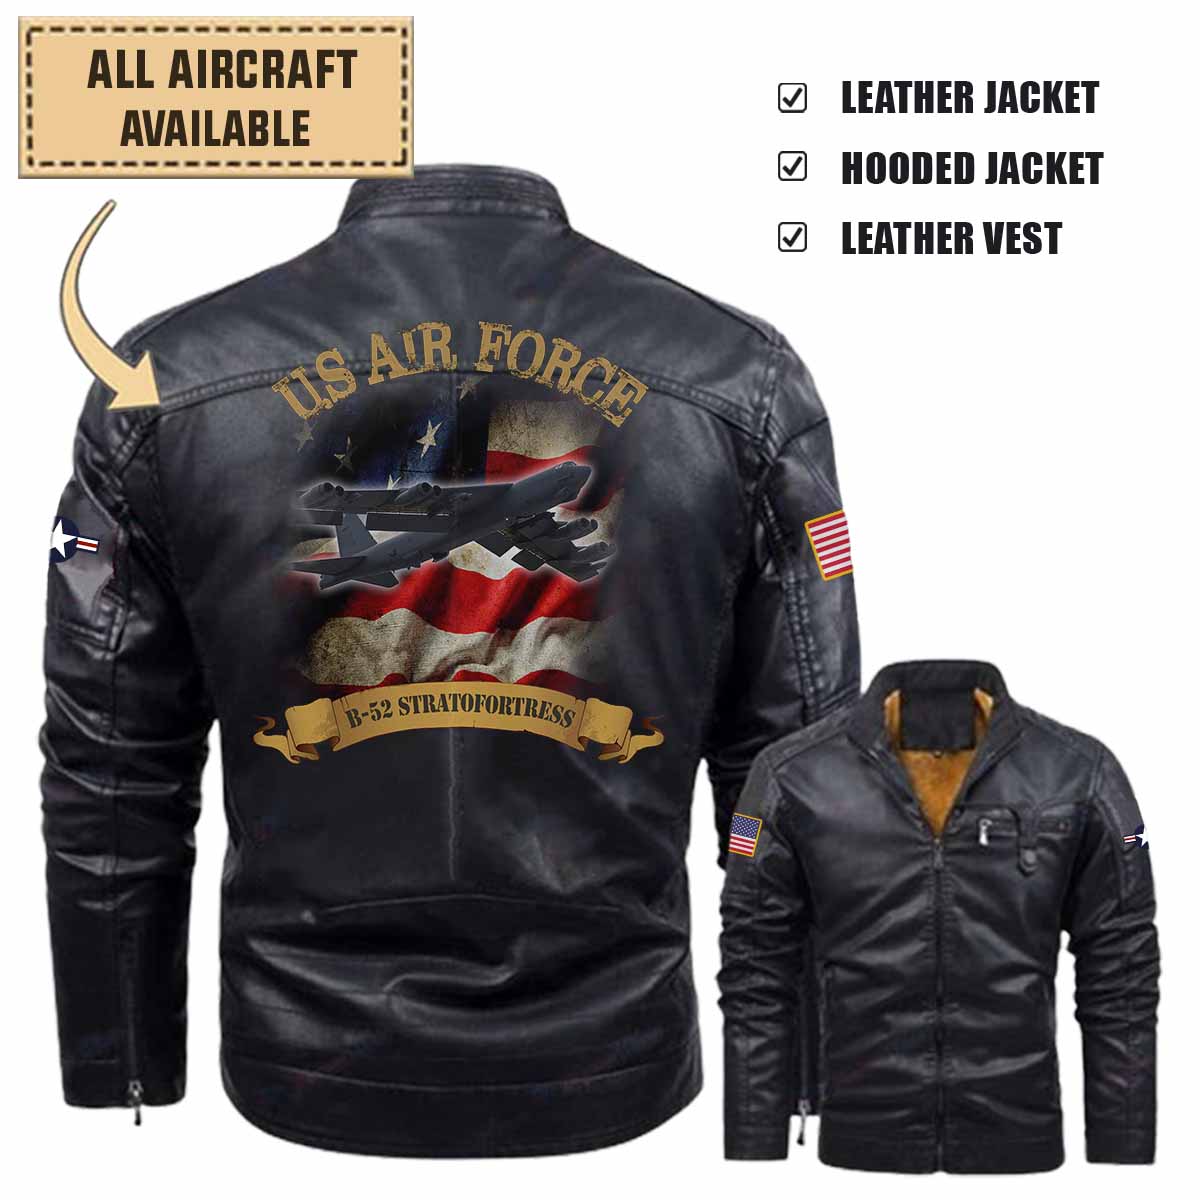 b 52 stratofortress b52 usafaircraft leather jacket and vest 5drsz